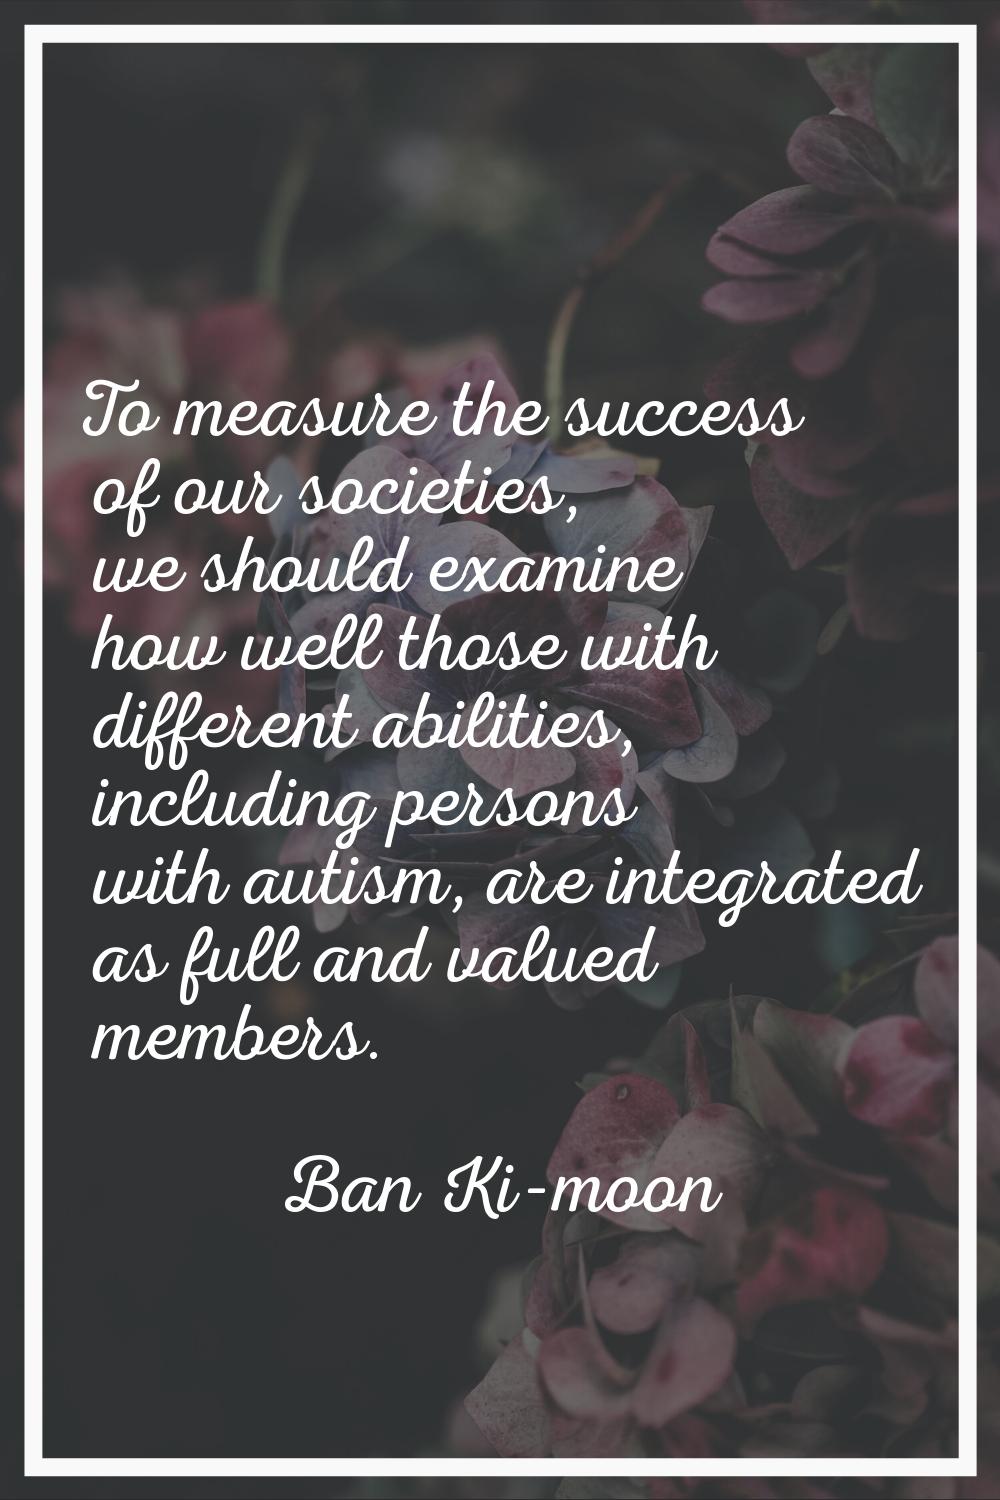 To measure the success of our societies, we should examine how well those with different abilities,